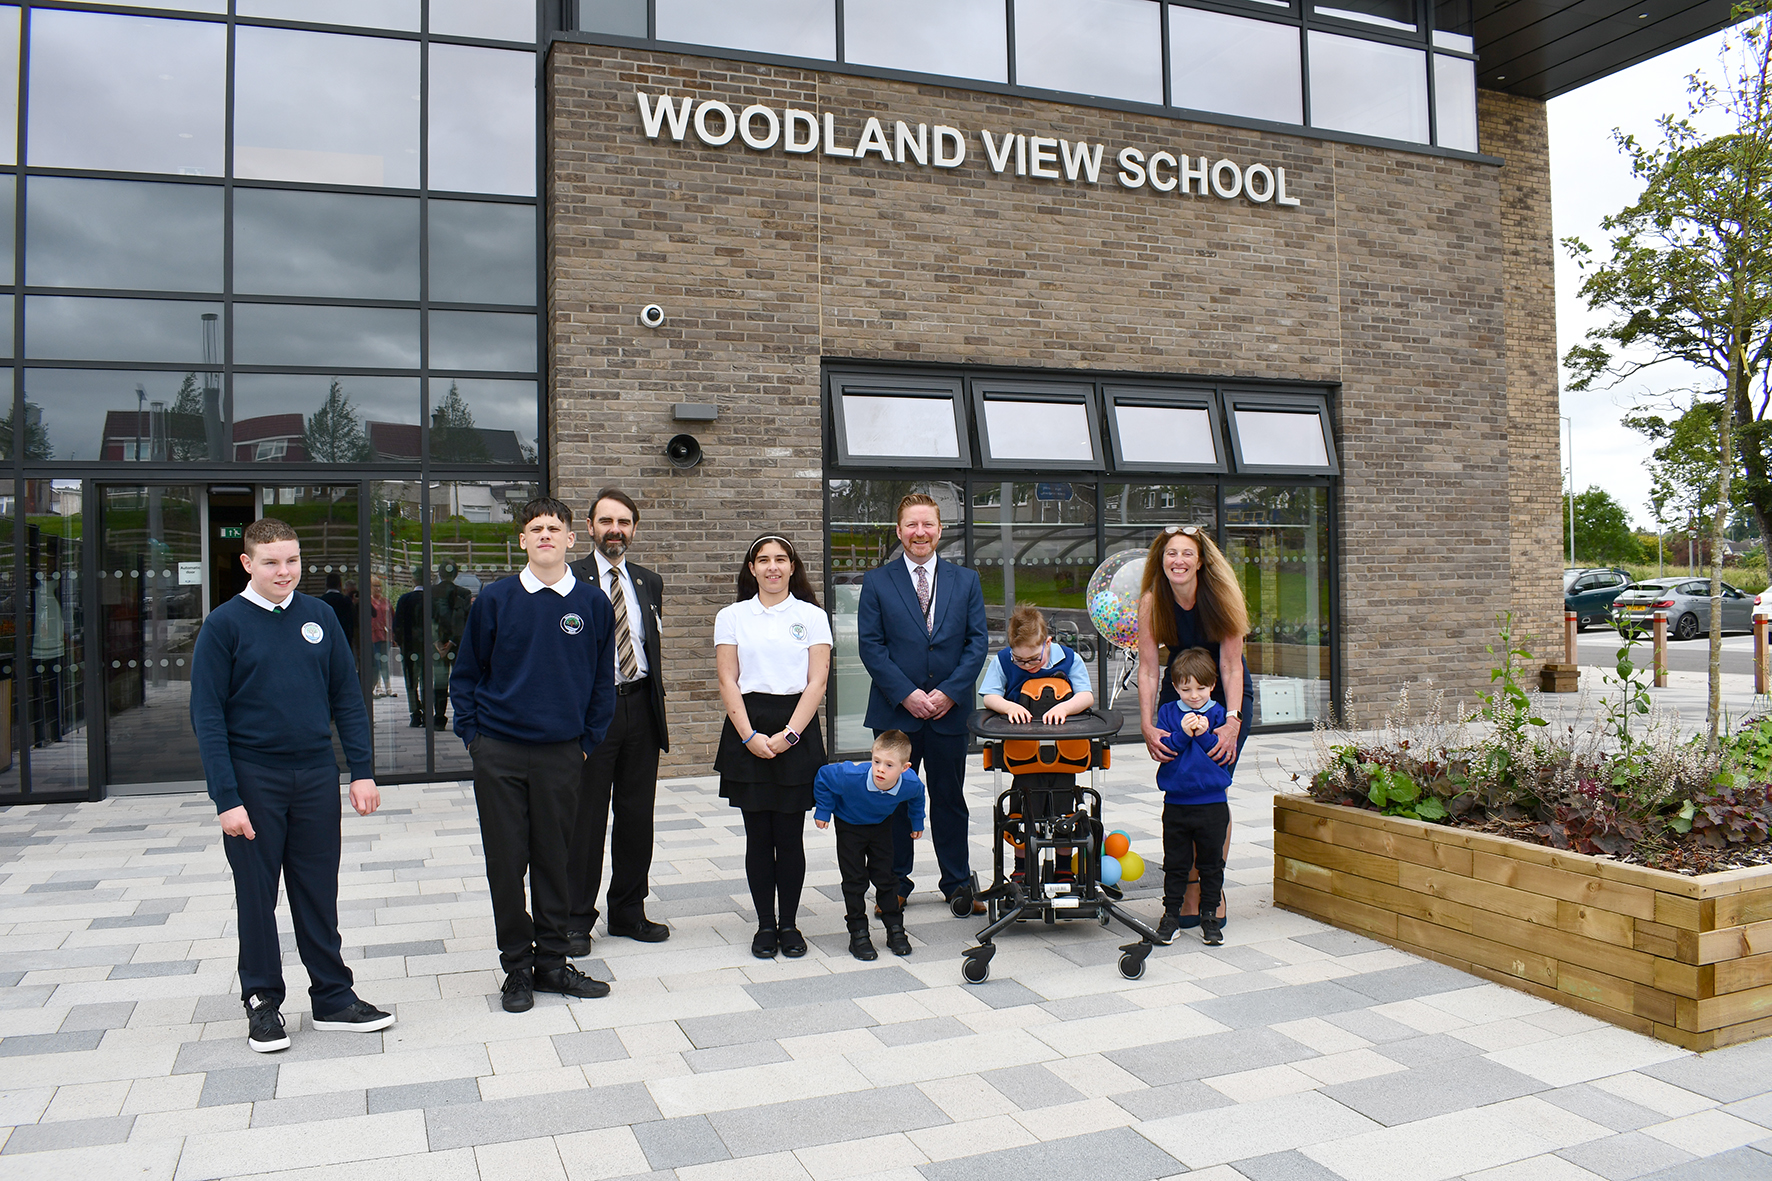 Councillor Gordan Low with Woodland View pupils and head teacher outside the new school building on opening day